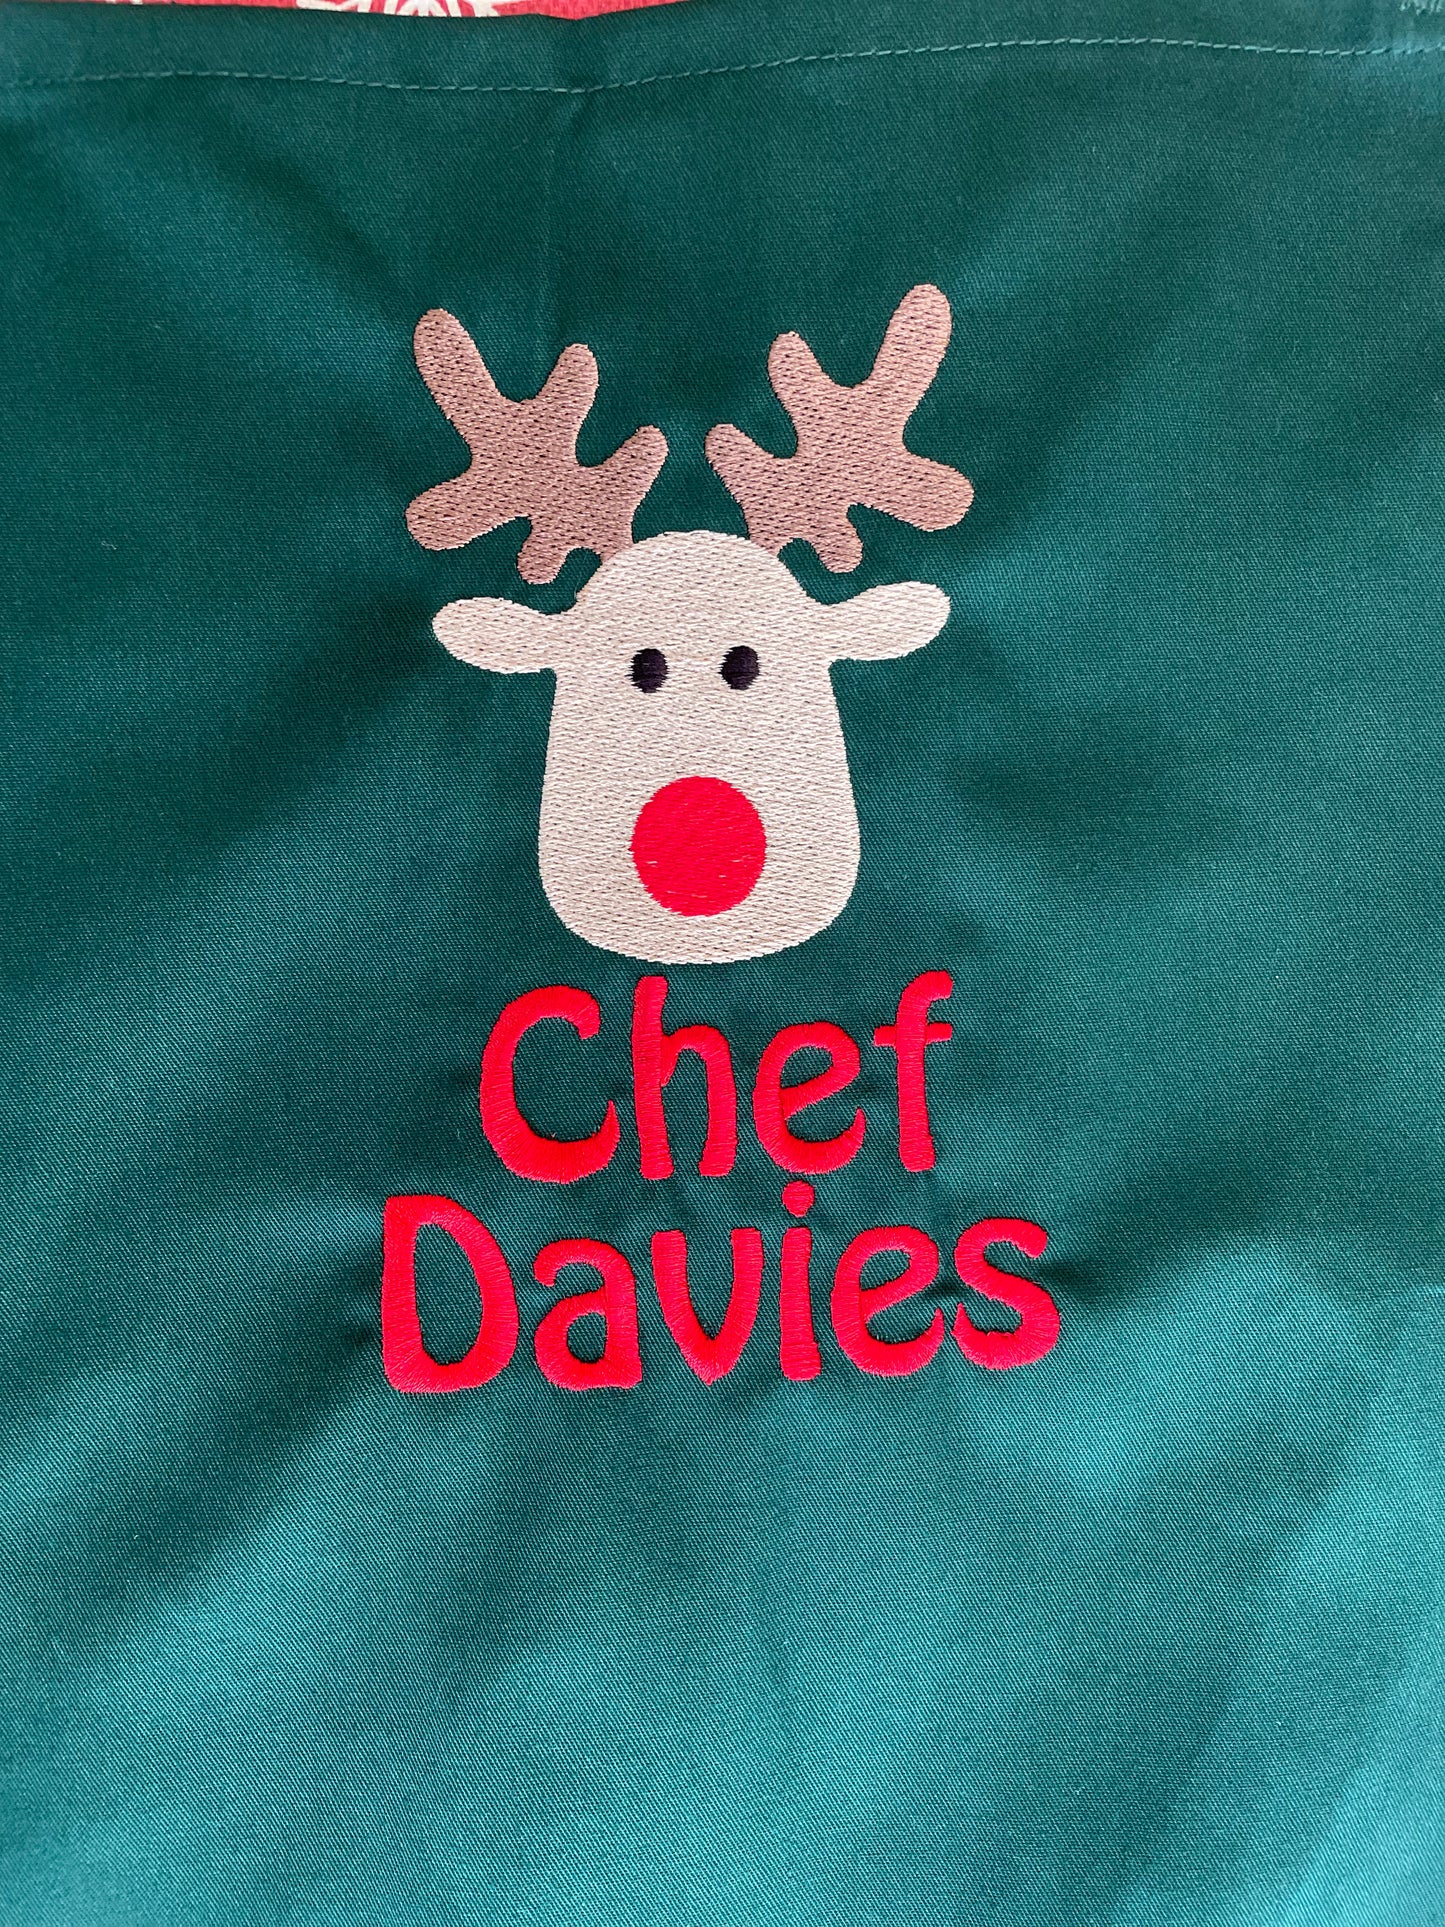 Christmas Embroidered apron, personalised with Rudolf & name. High quality